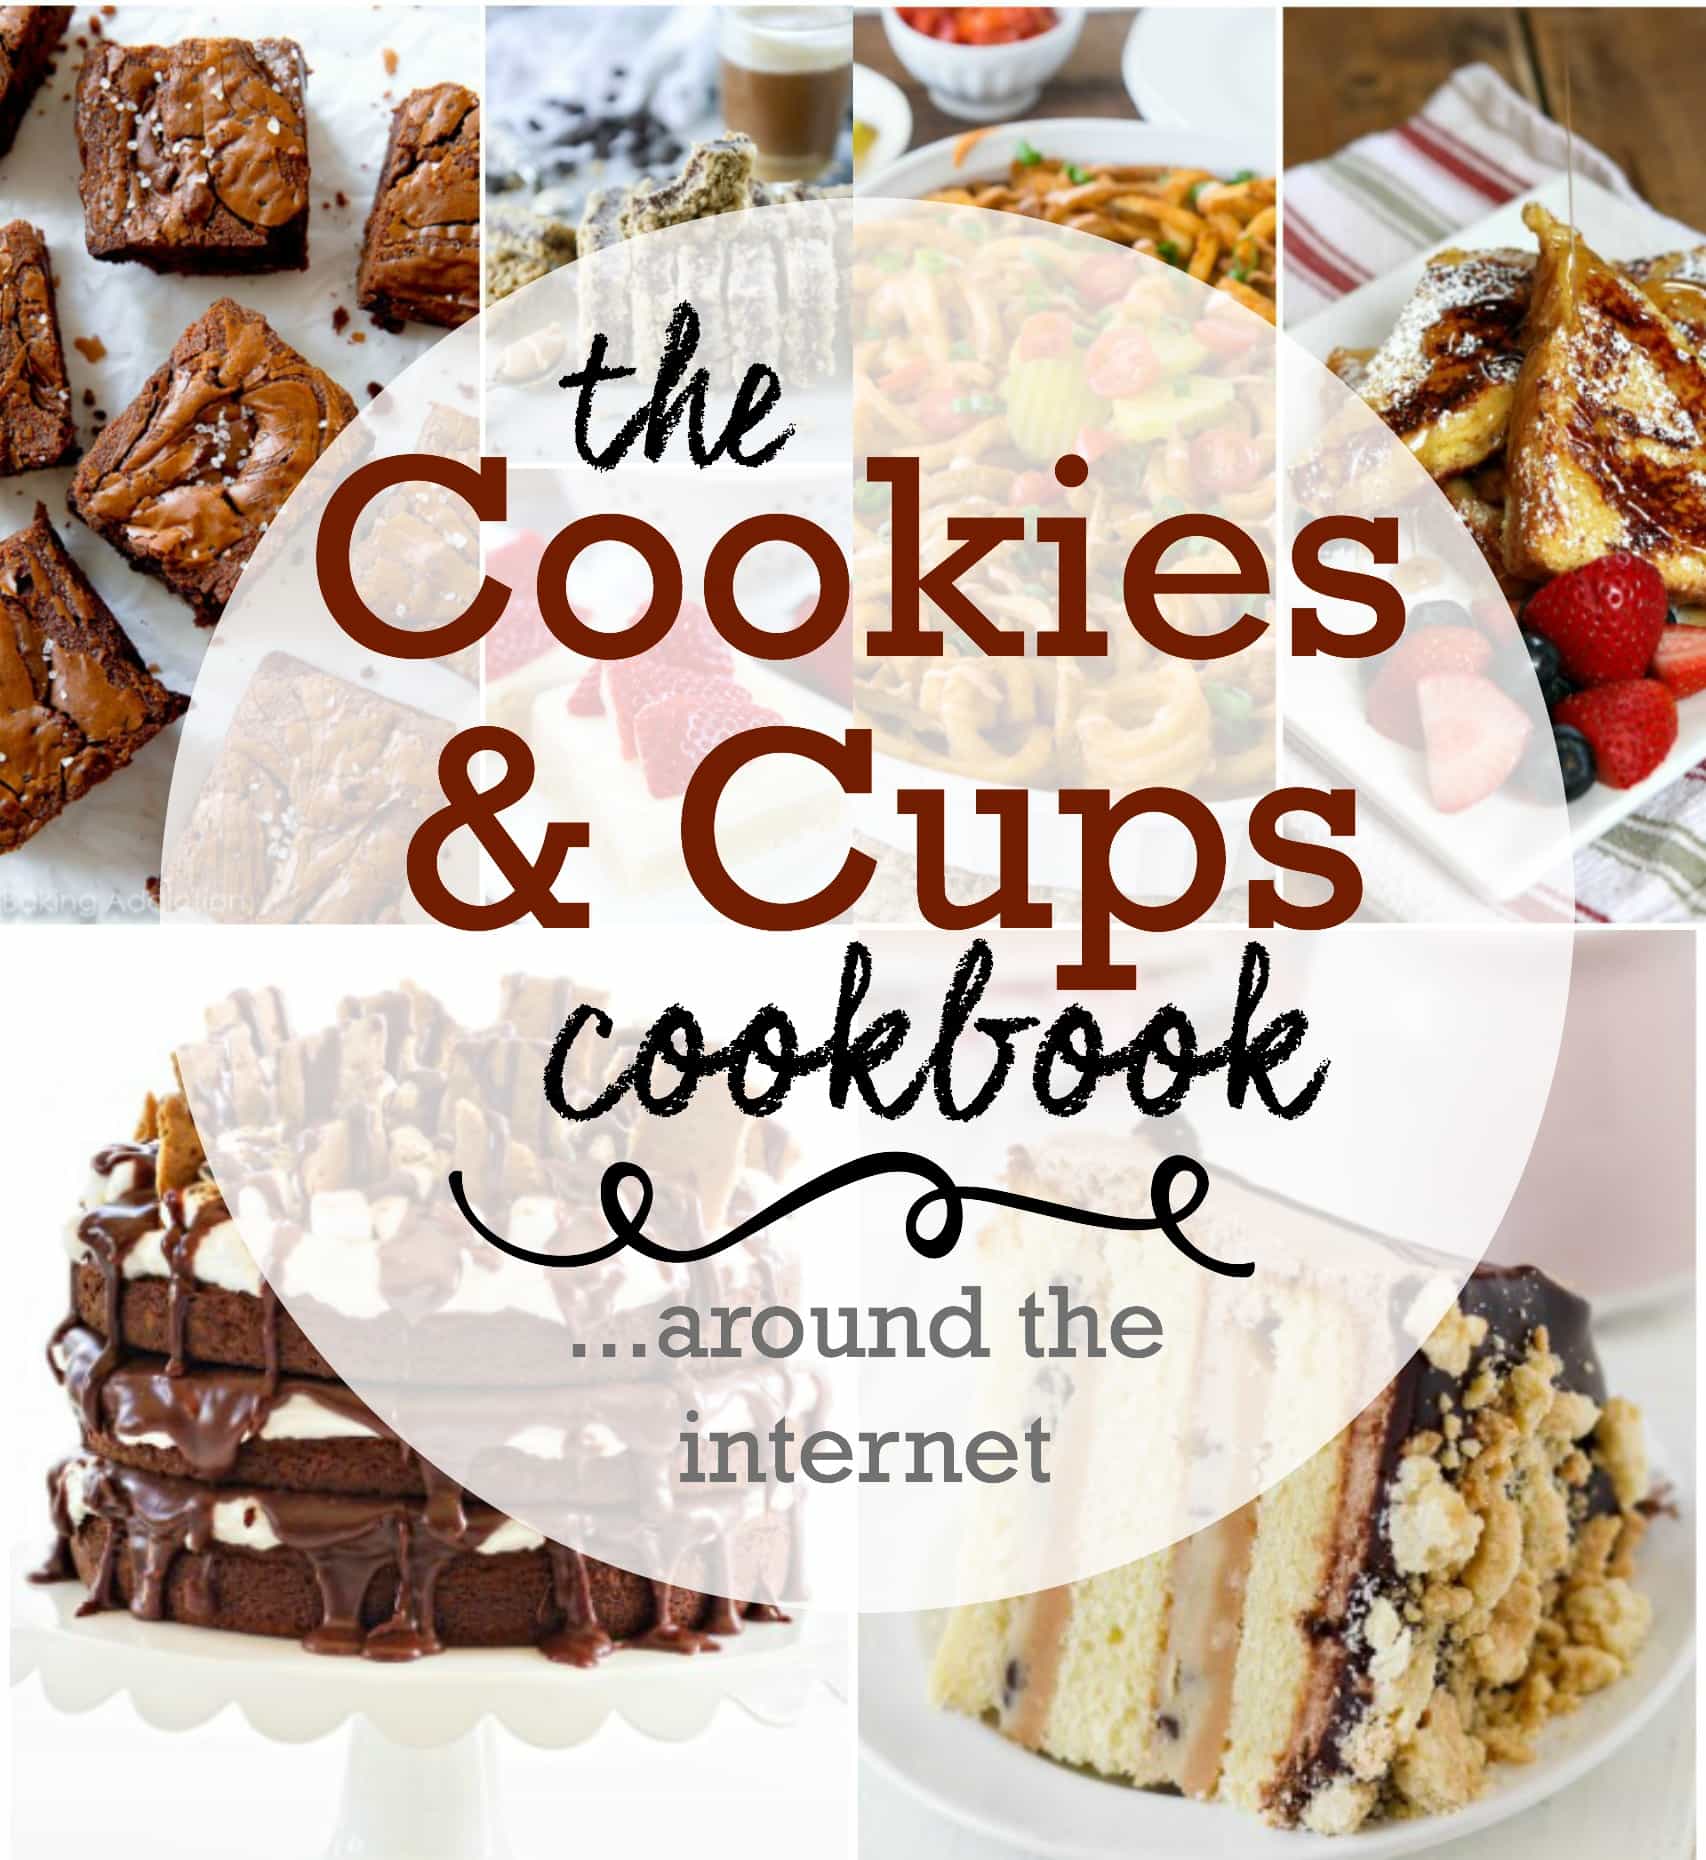 A Collage of Images of Different DIshes Behind Text Advertising the Cookies & Cups Cookbook